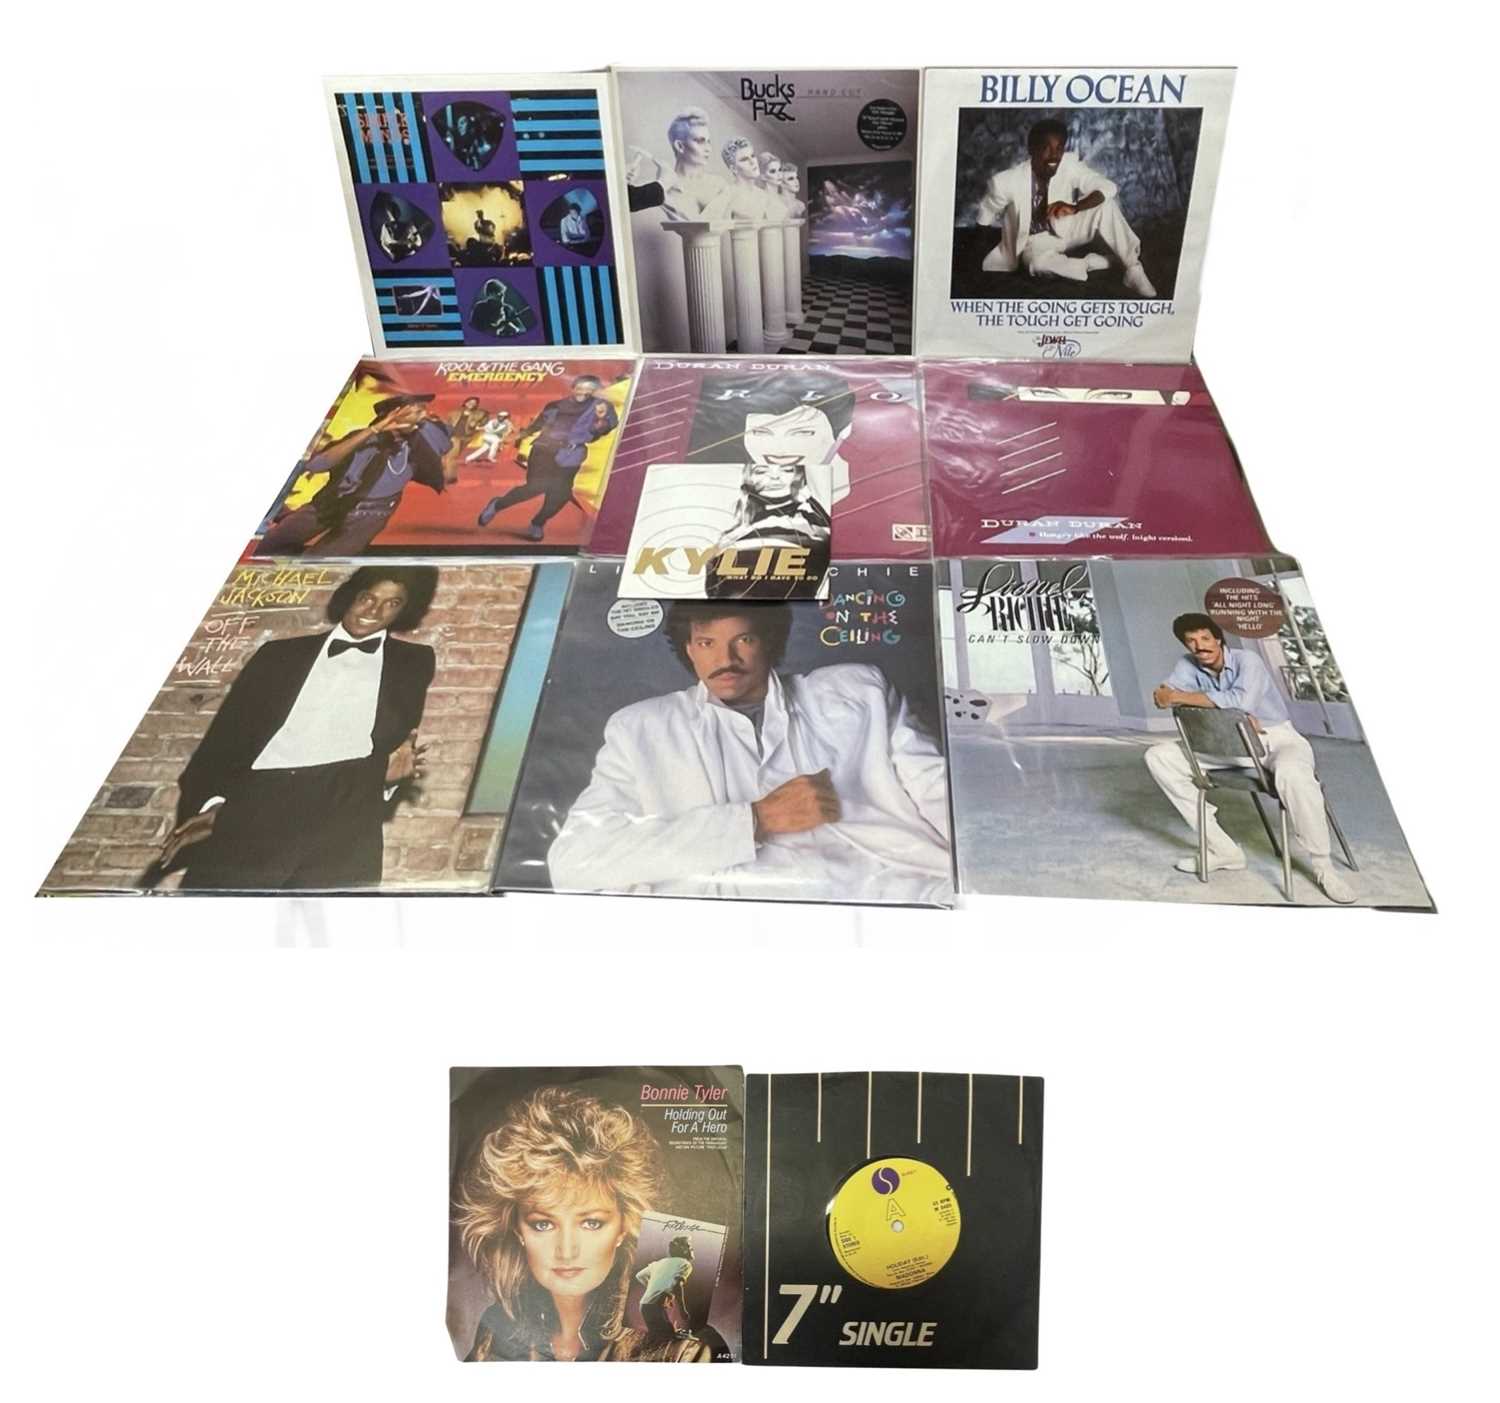 A mixed lot of 12" vinyl LPs, 1980s+ pop, to include: - Michael Jackson - Off the Wall, 1979, EPC